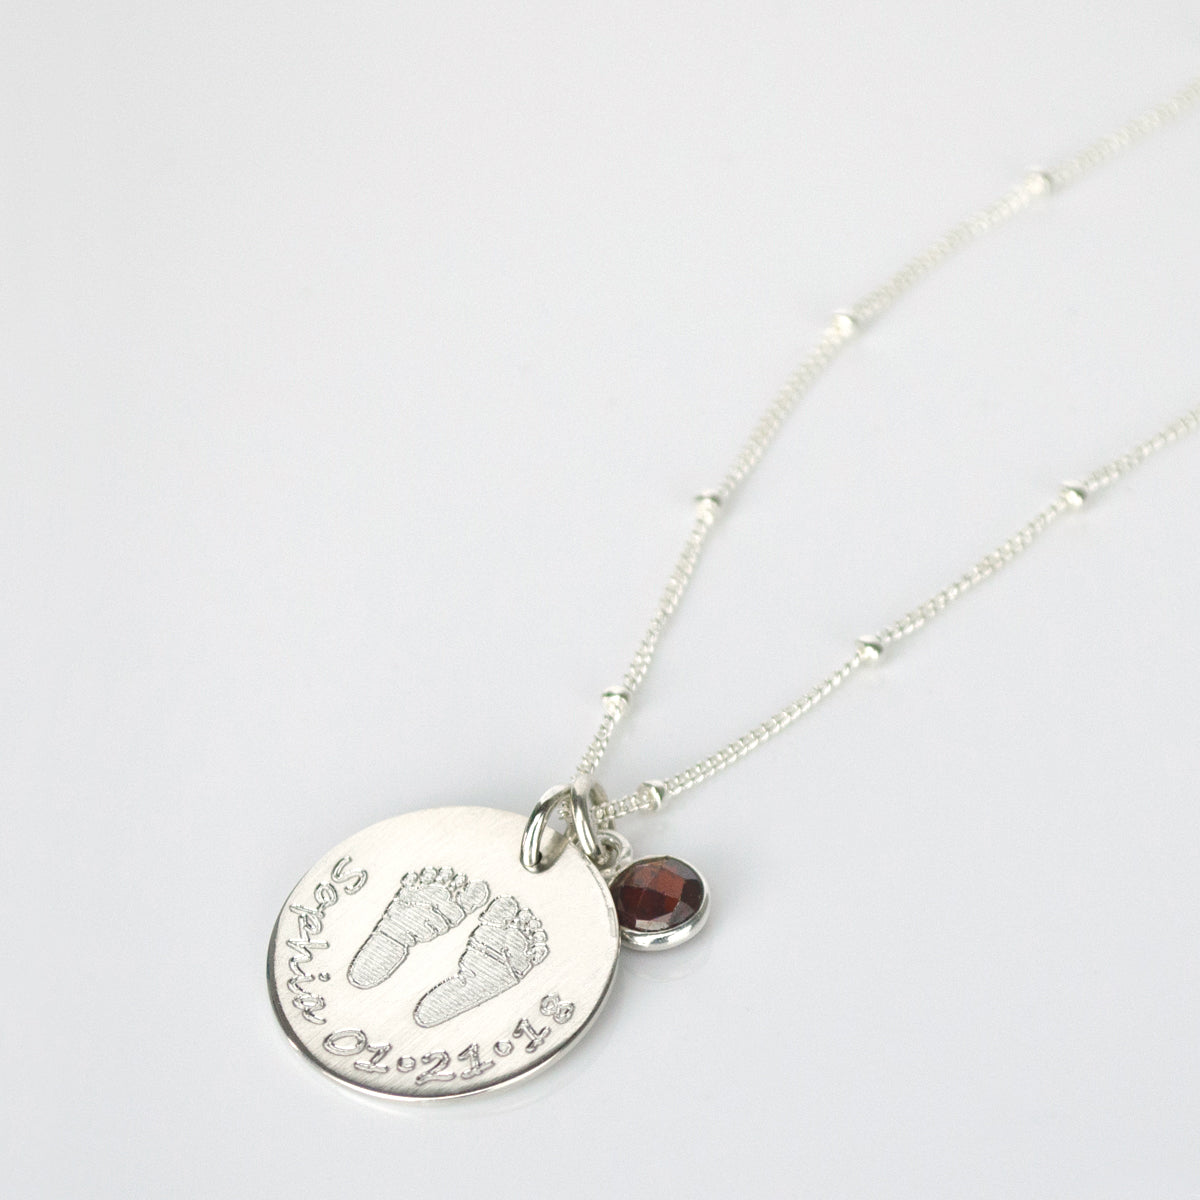 Engraved Baby Footprints or Handprints Necklace with Birthstone Charm